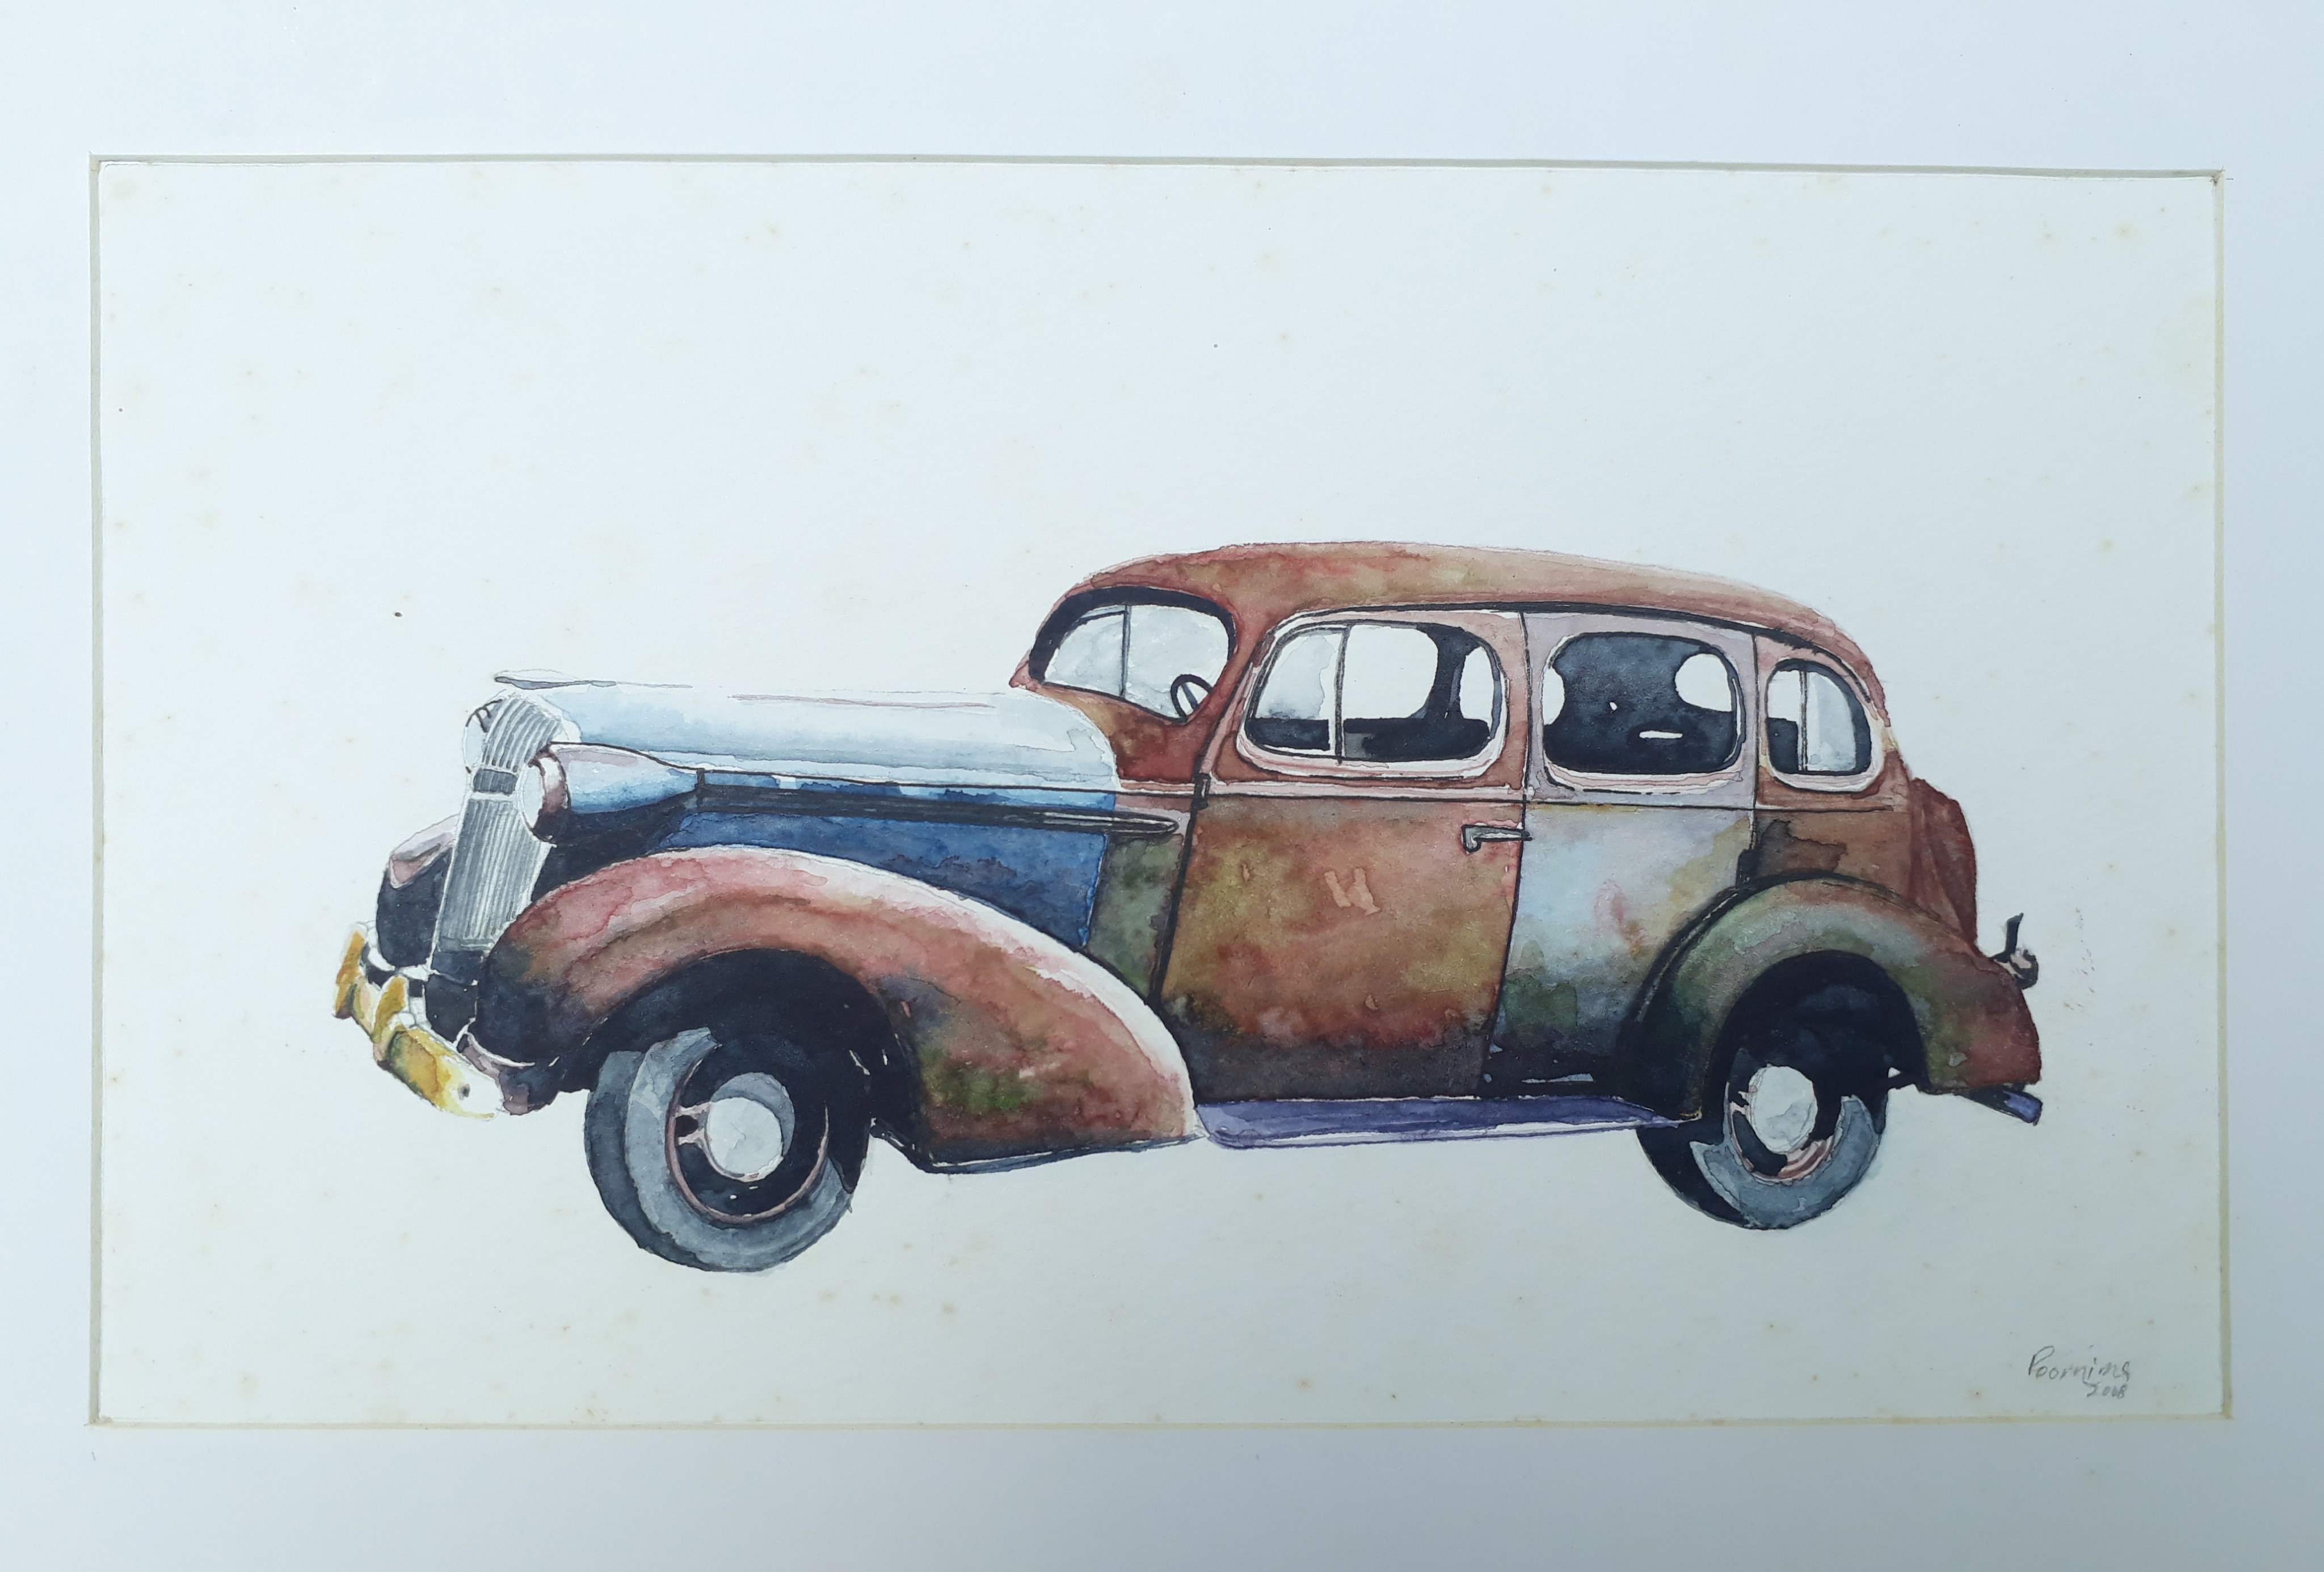 THE ANTIQUE CAR by Poornima Palangasinghe